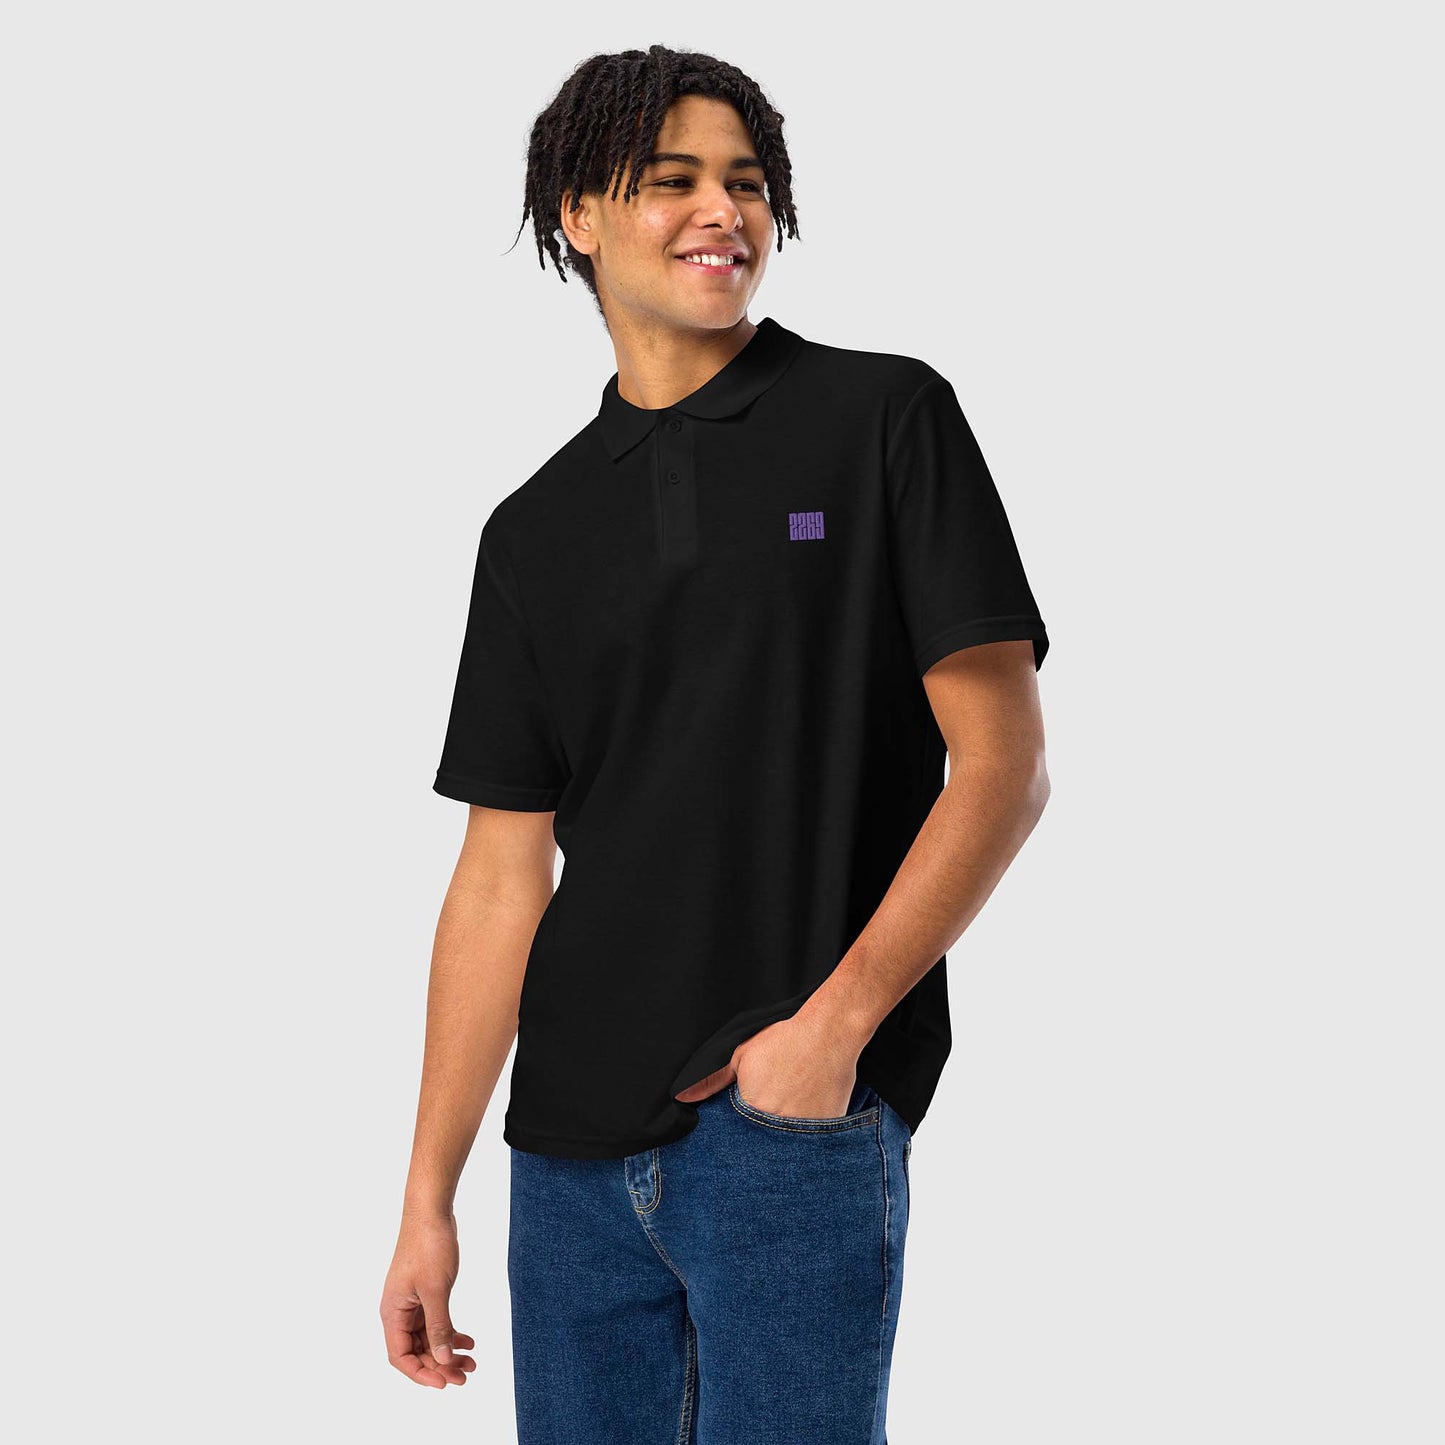 Unisex black pique polo shirt with embroidered 2269 logo